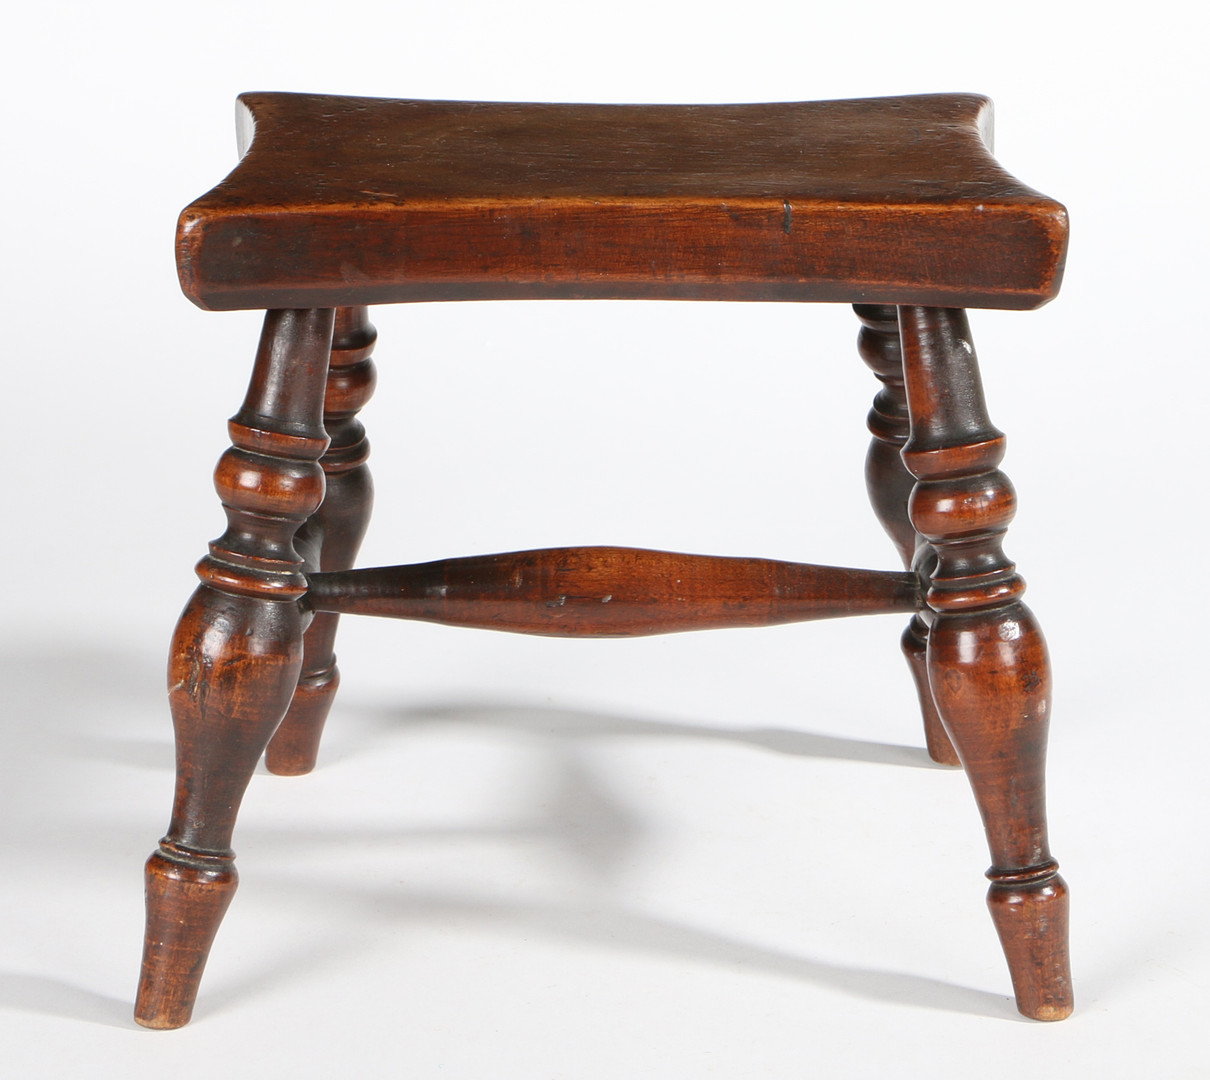 A FRUITWOOD TABLE-TOP STOOL/CANDLE-STAND, ENGLISH, CIRCA 1820. - Image 2 of 2